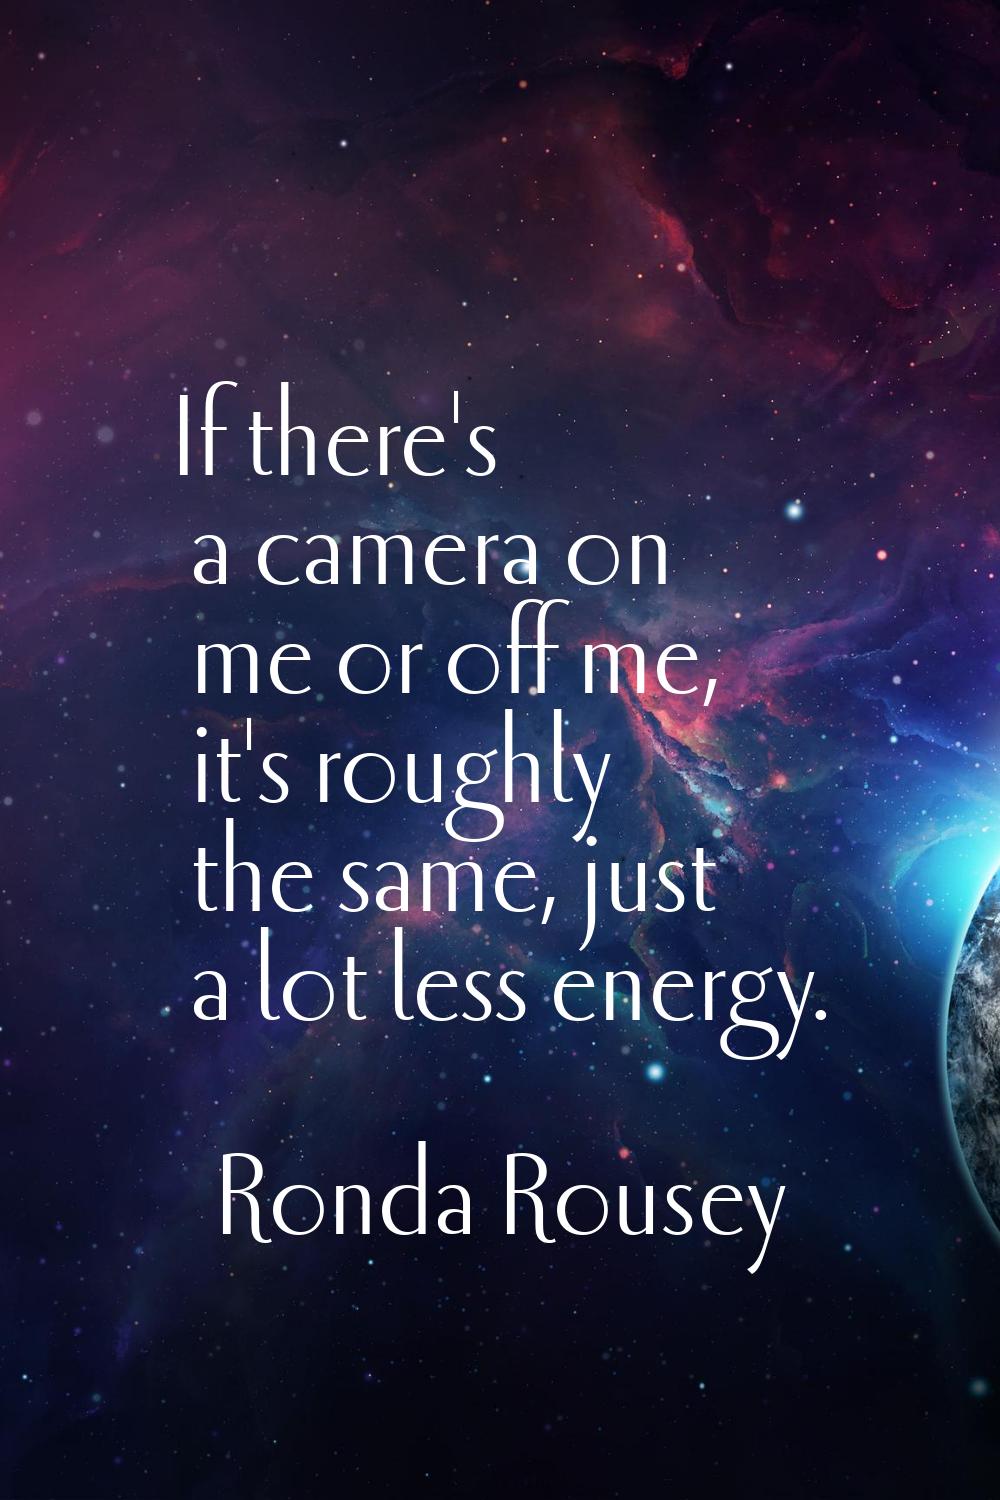 If there's a camera on me or off me, it's roughly the same, just a lot less energy.